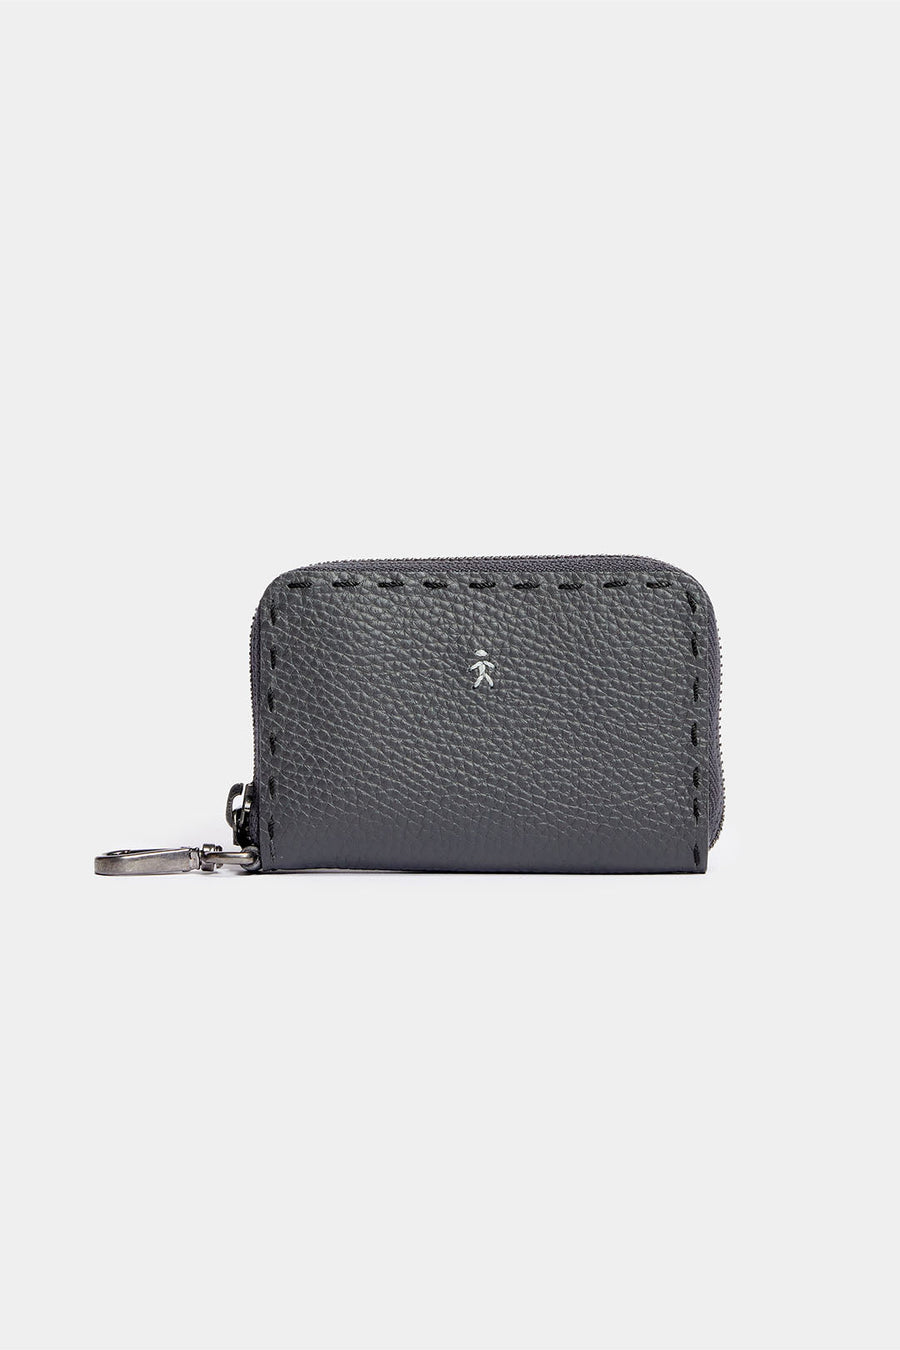 HENRY BEGUELIN ZIP WALLET, GRAY - Burning Torch Online Boutique